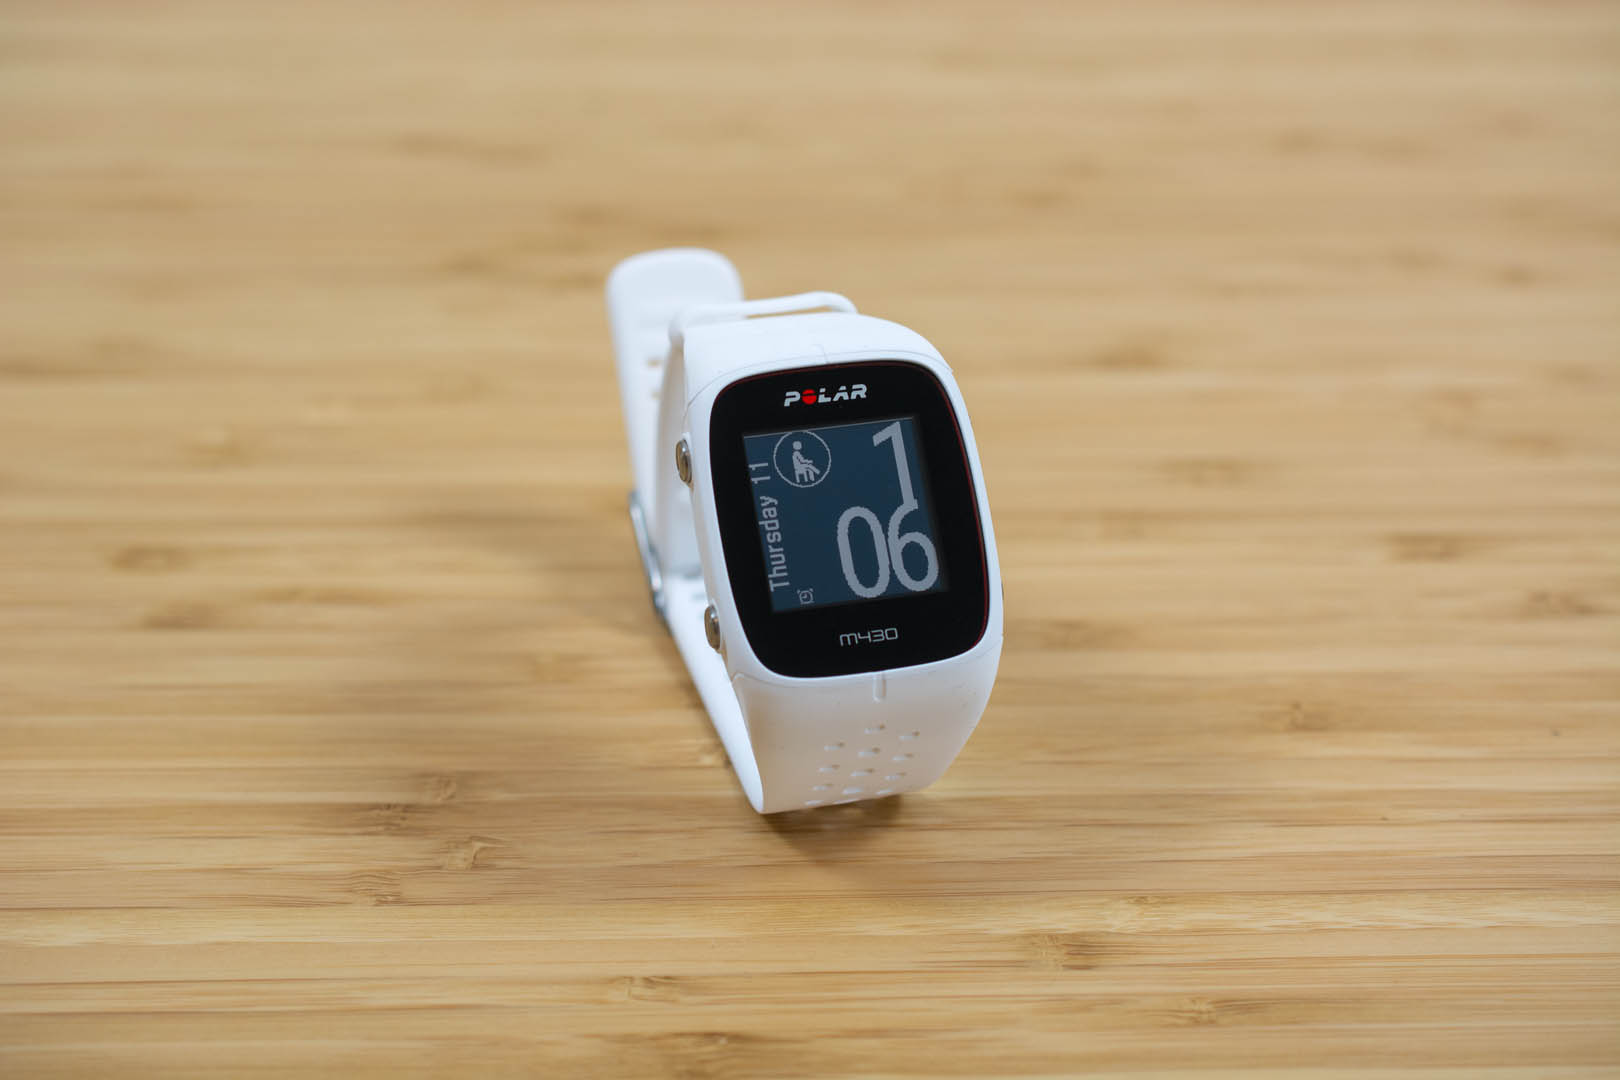 Review: Running or not, you'll want the Polar M430 on your wrist